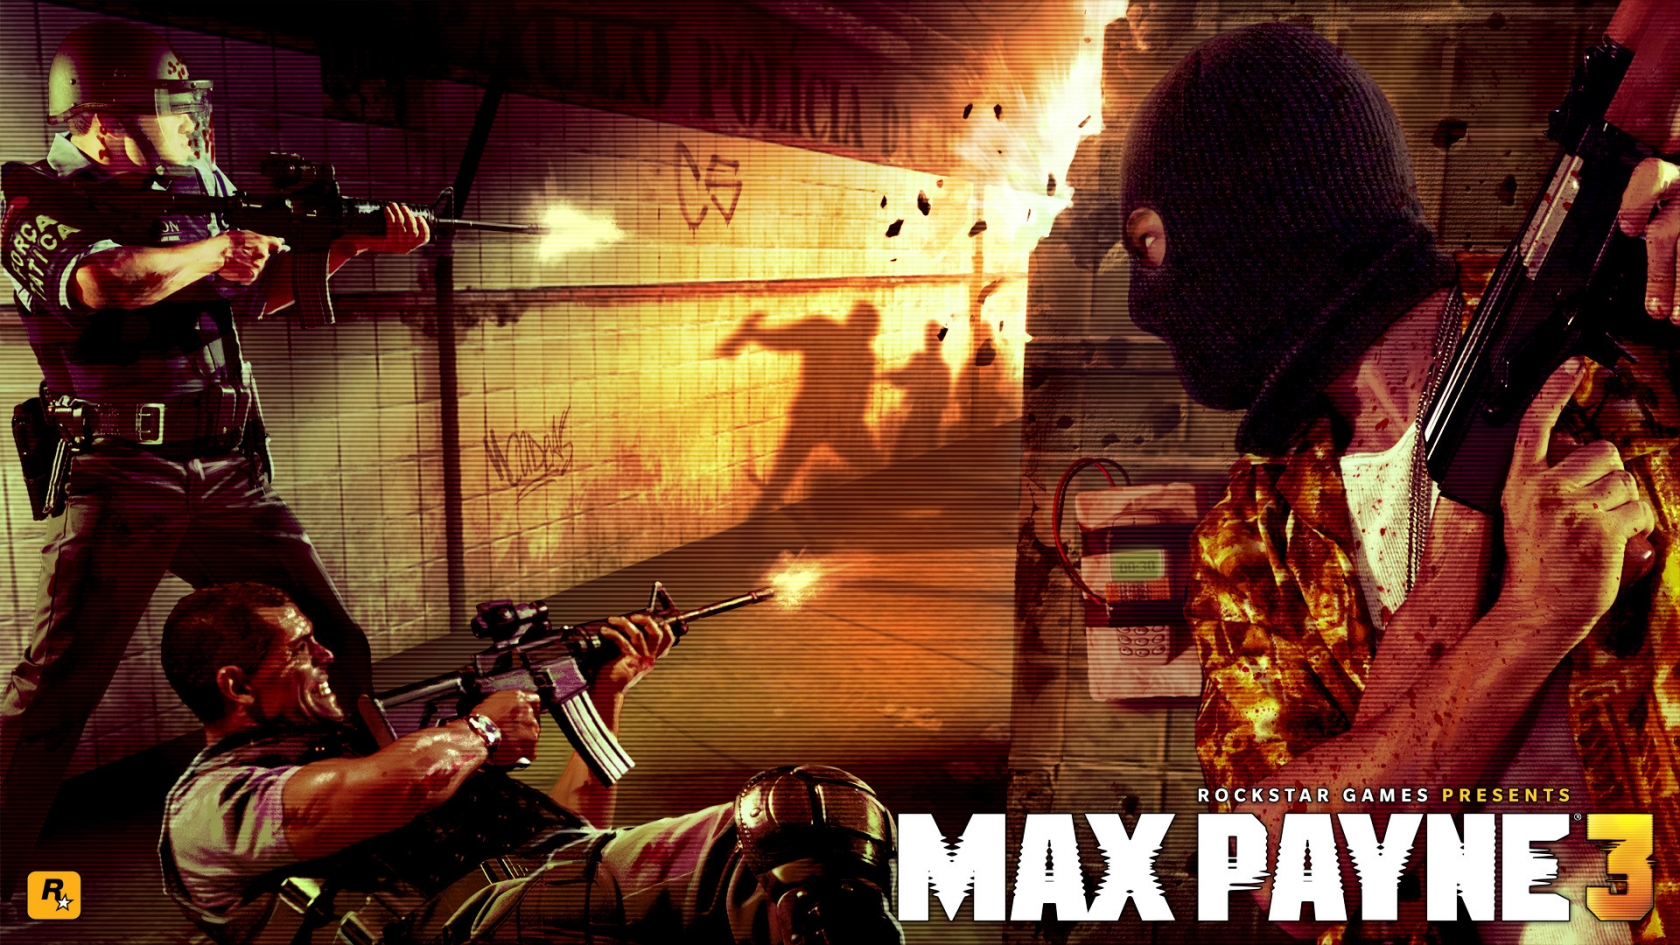 Maxpayne3 Local Justice for 1680 x 945 HDTV resolution